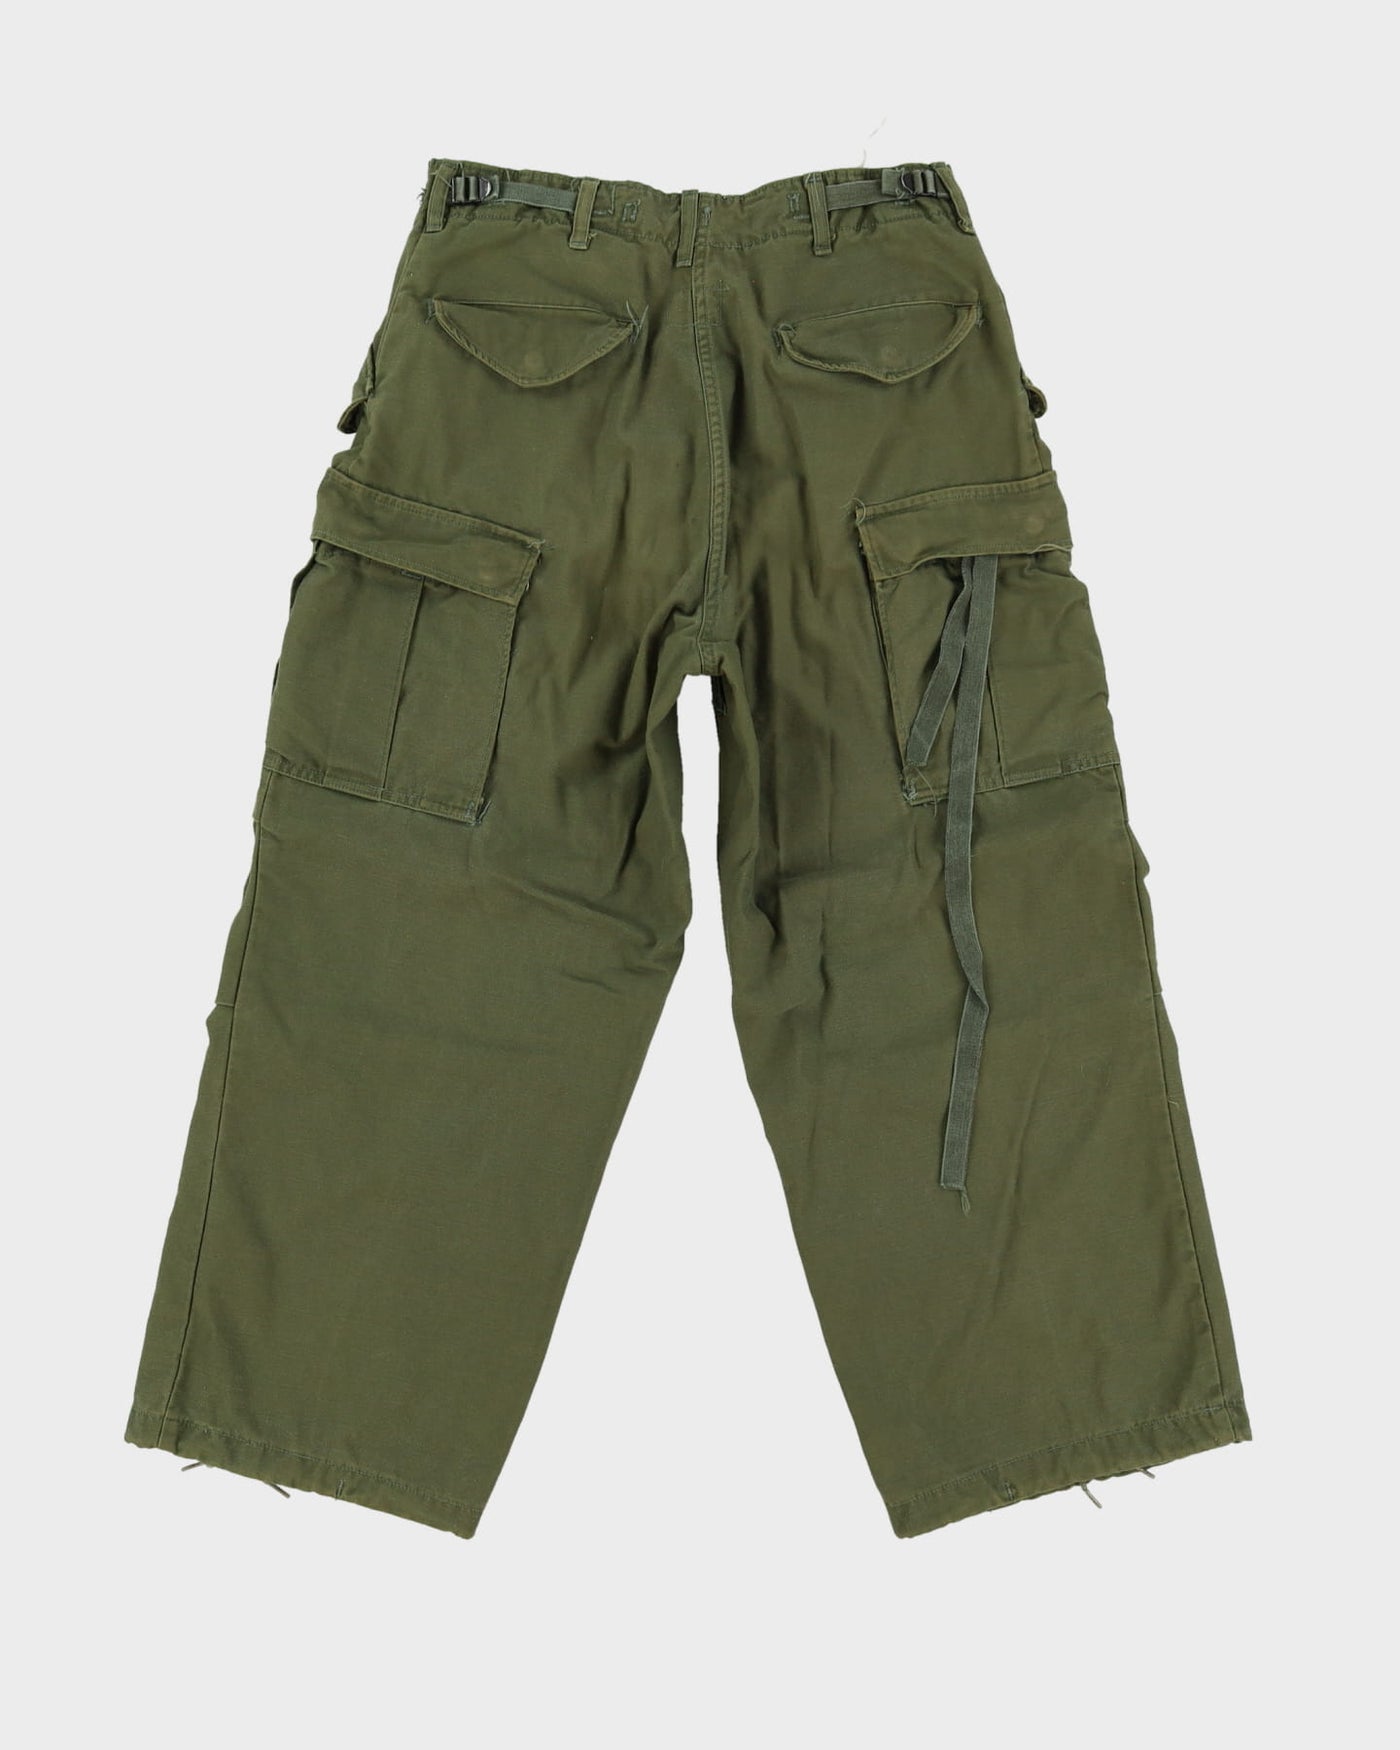 70s Vintage US Army M65 Cold Weather Trousers - 30x26